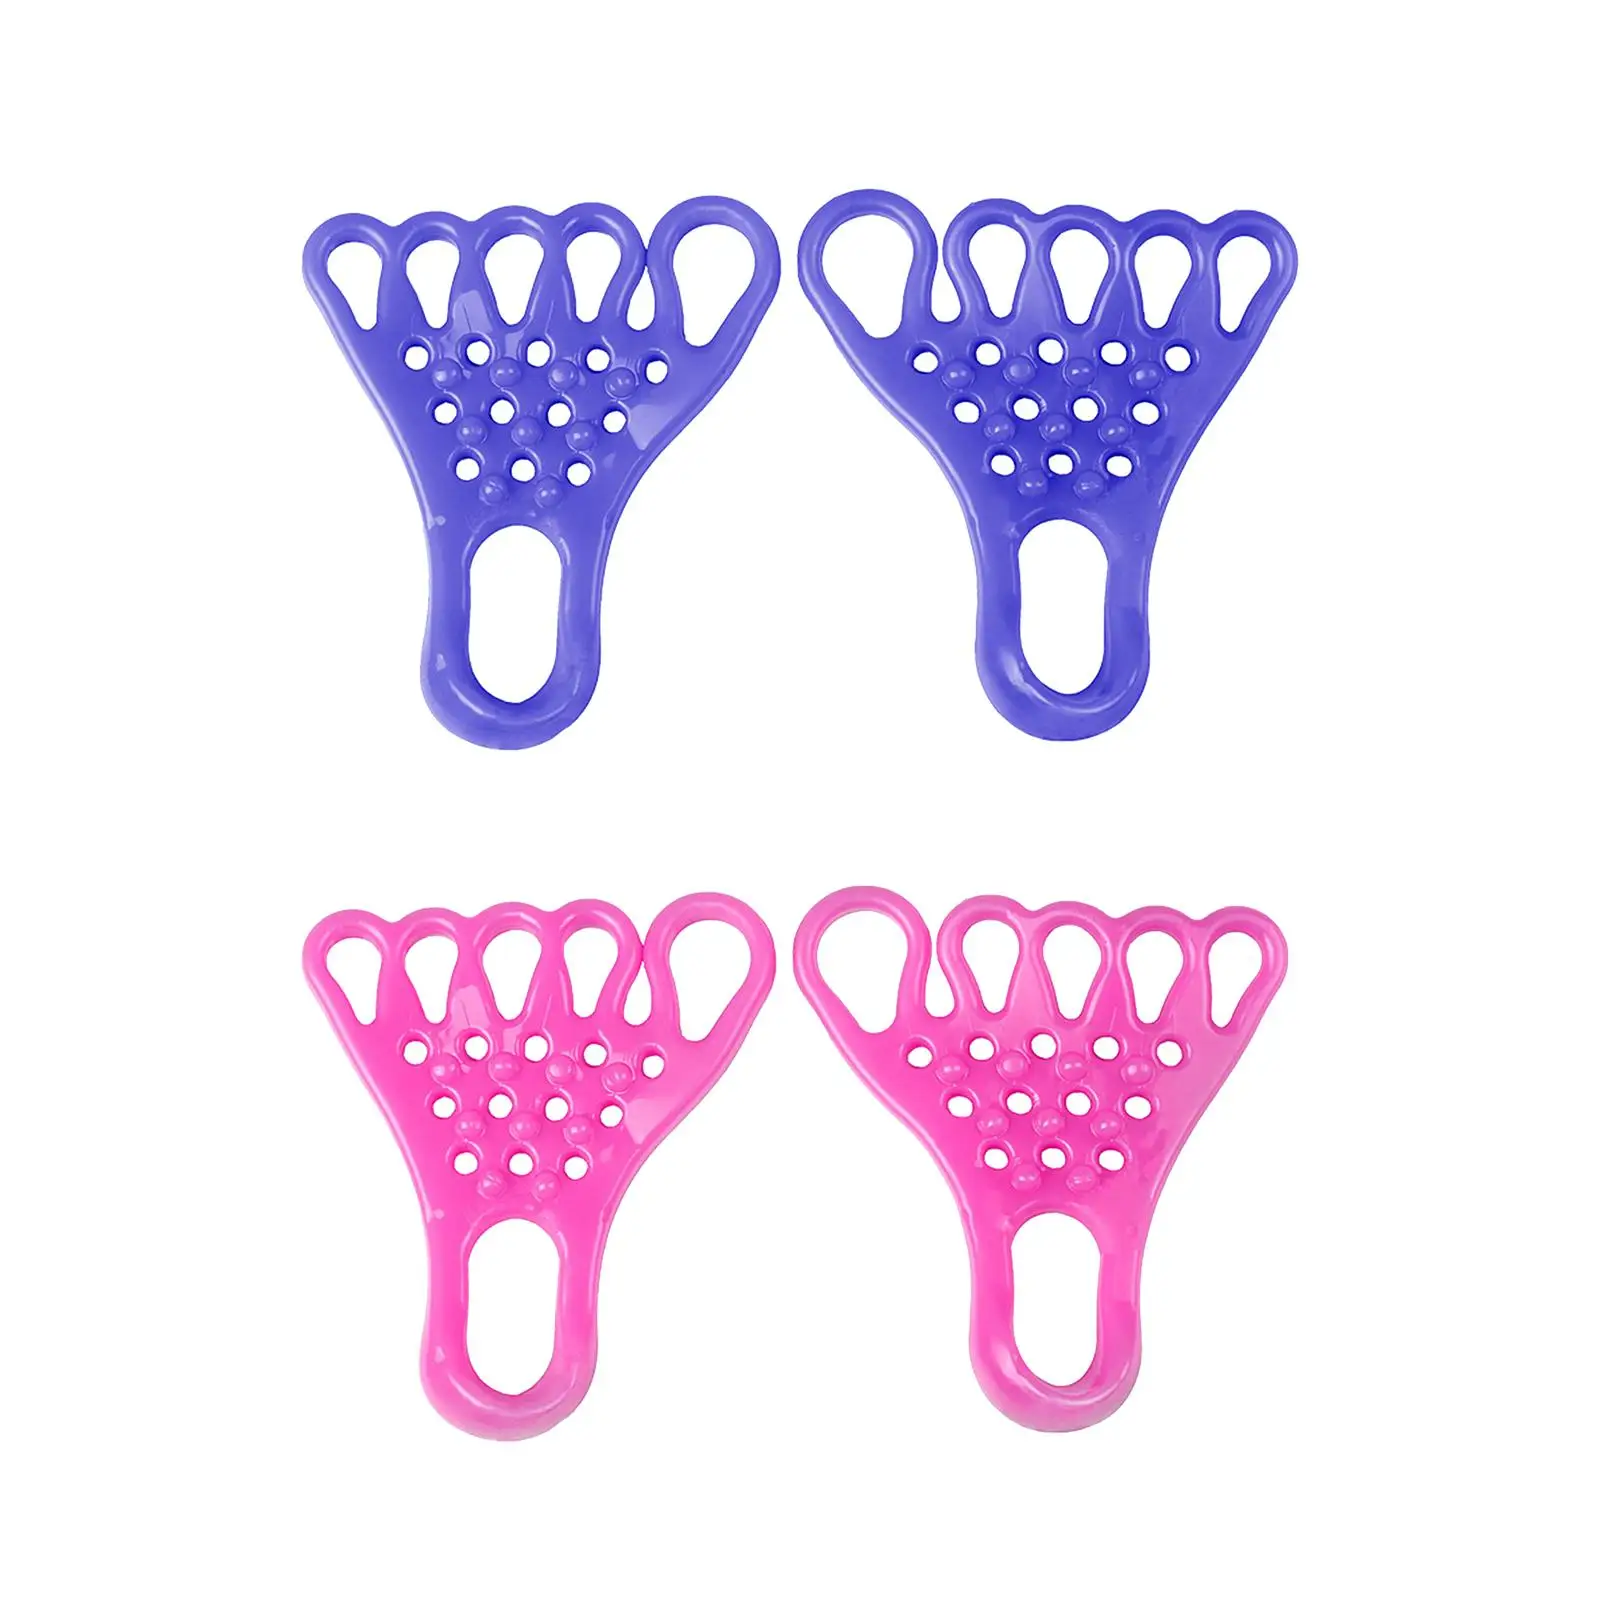 Toe Straightener Foot Care Stretcher Hammer Toe Splints Toe Spacer for Yoga Overlapping Toes Big Toe Bunions Hallux Valgus